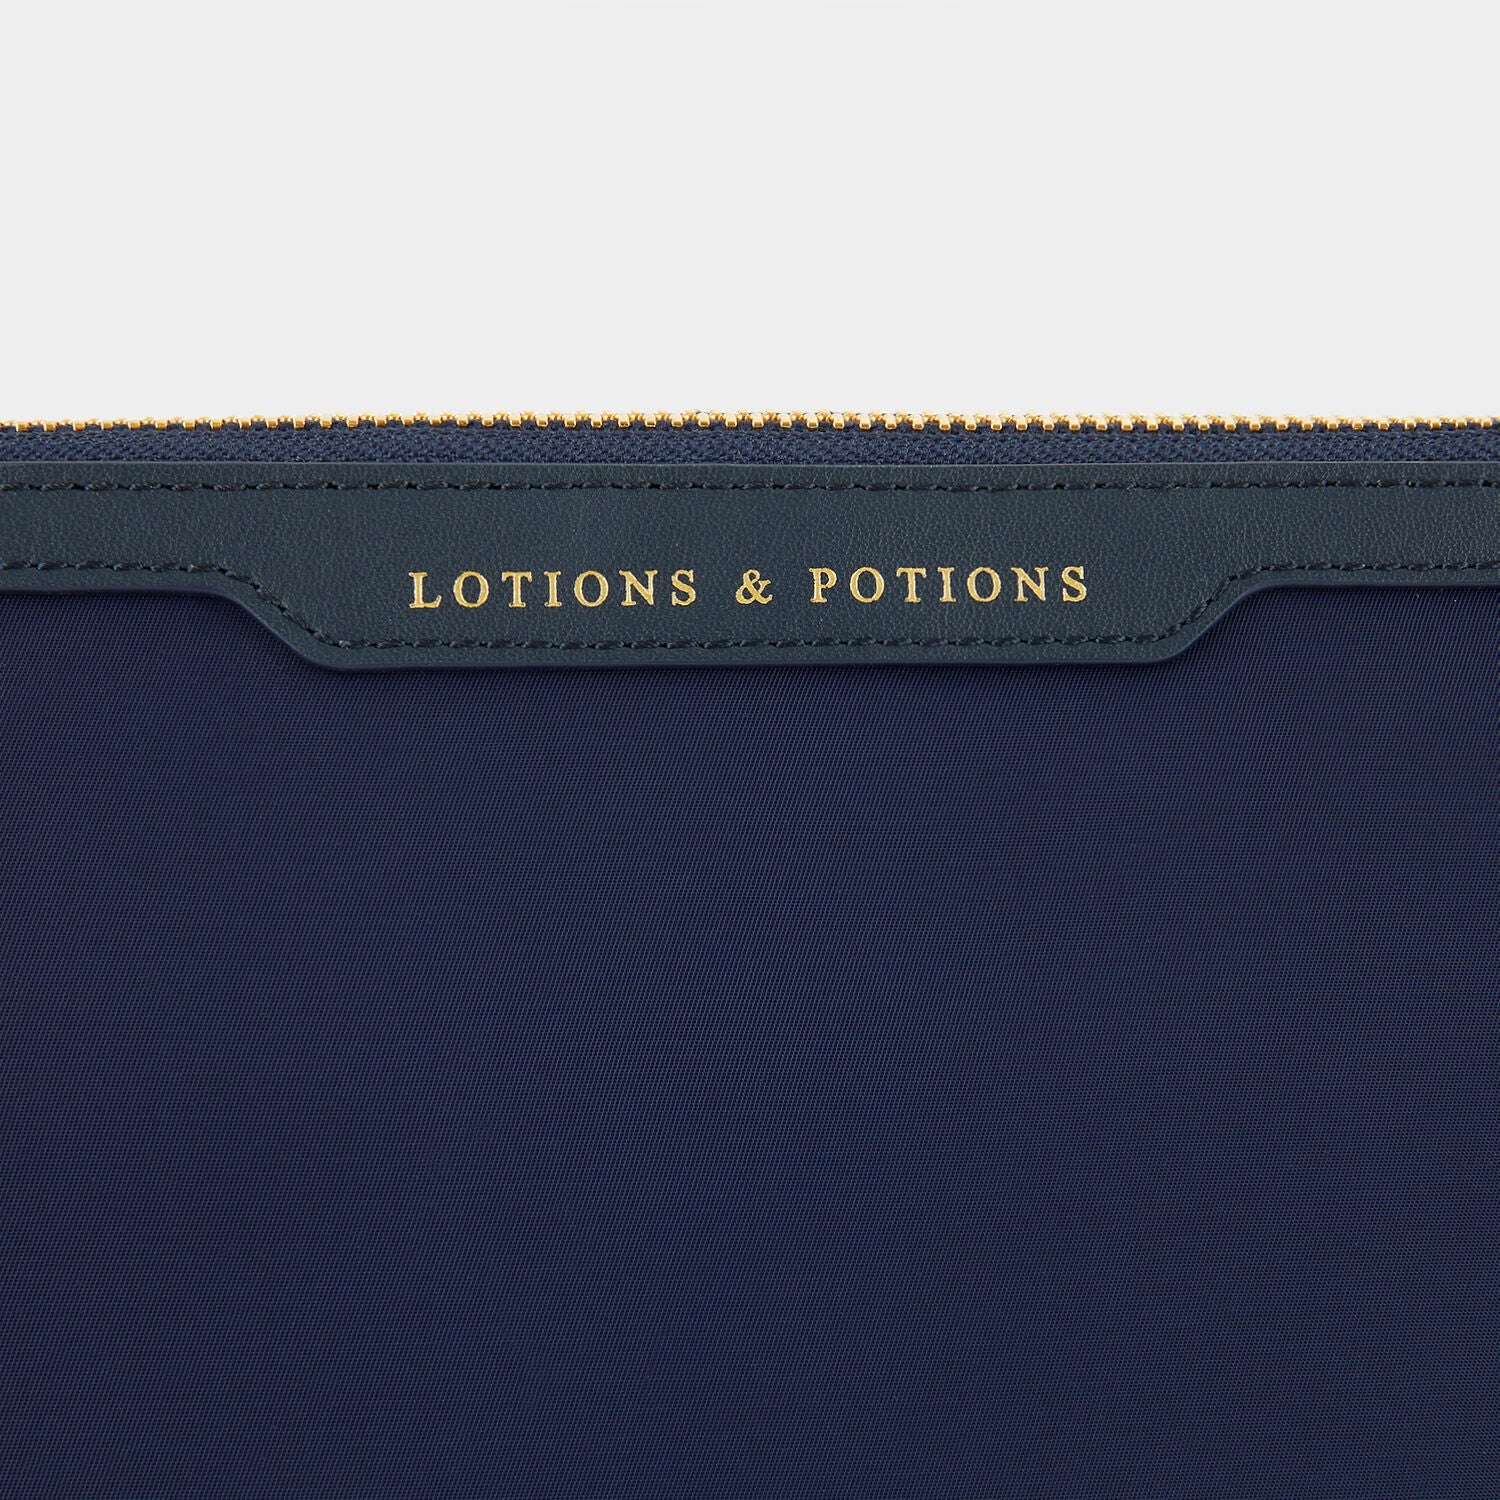 Lotions and Potions Pouch | Anya Hindmarch UK